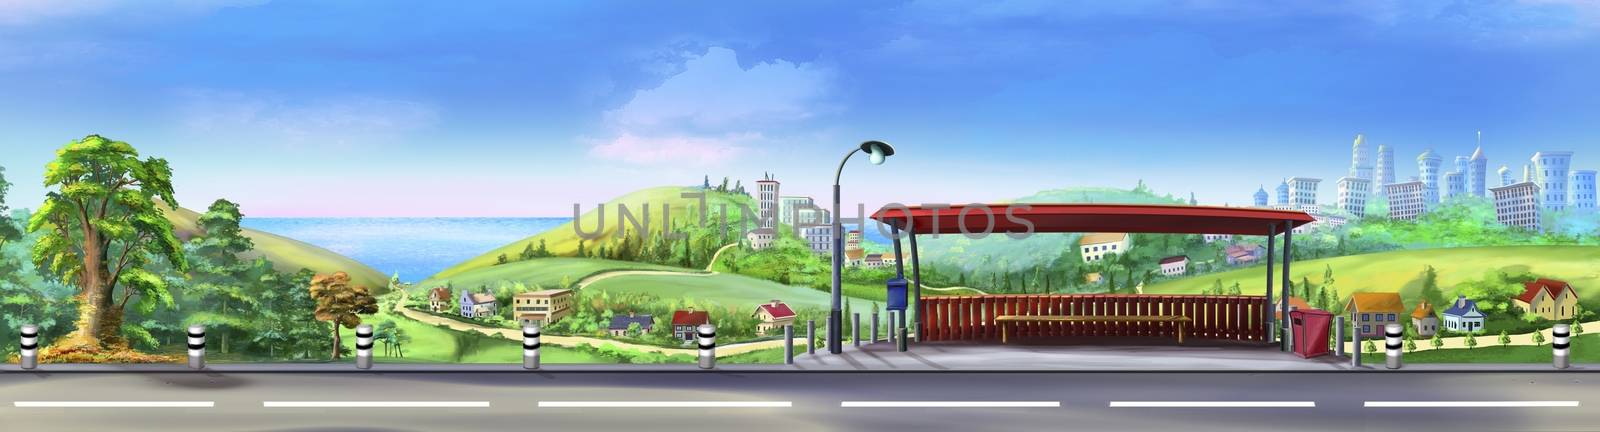 Digital painting of the view from the road with bus stop and asphalt road